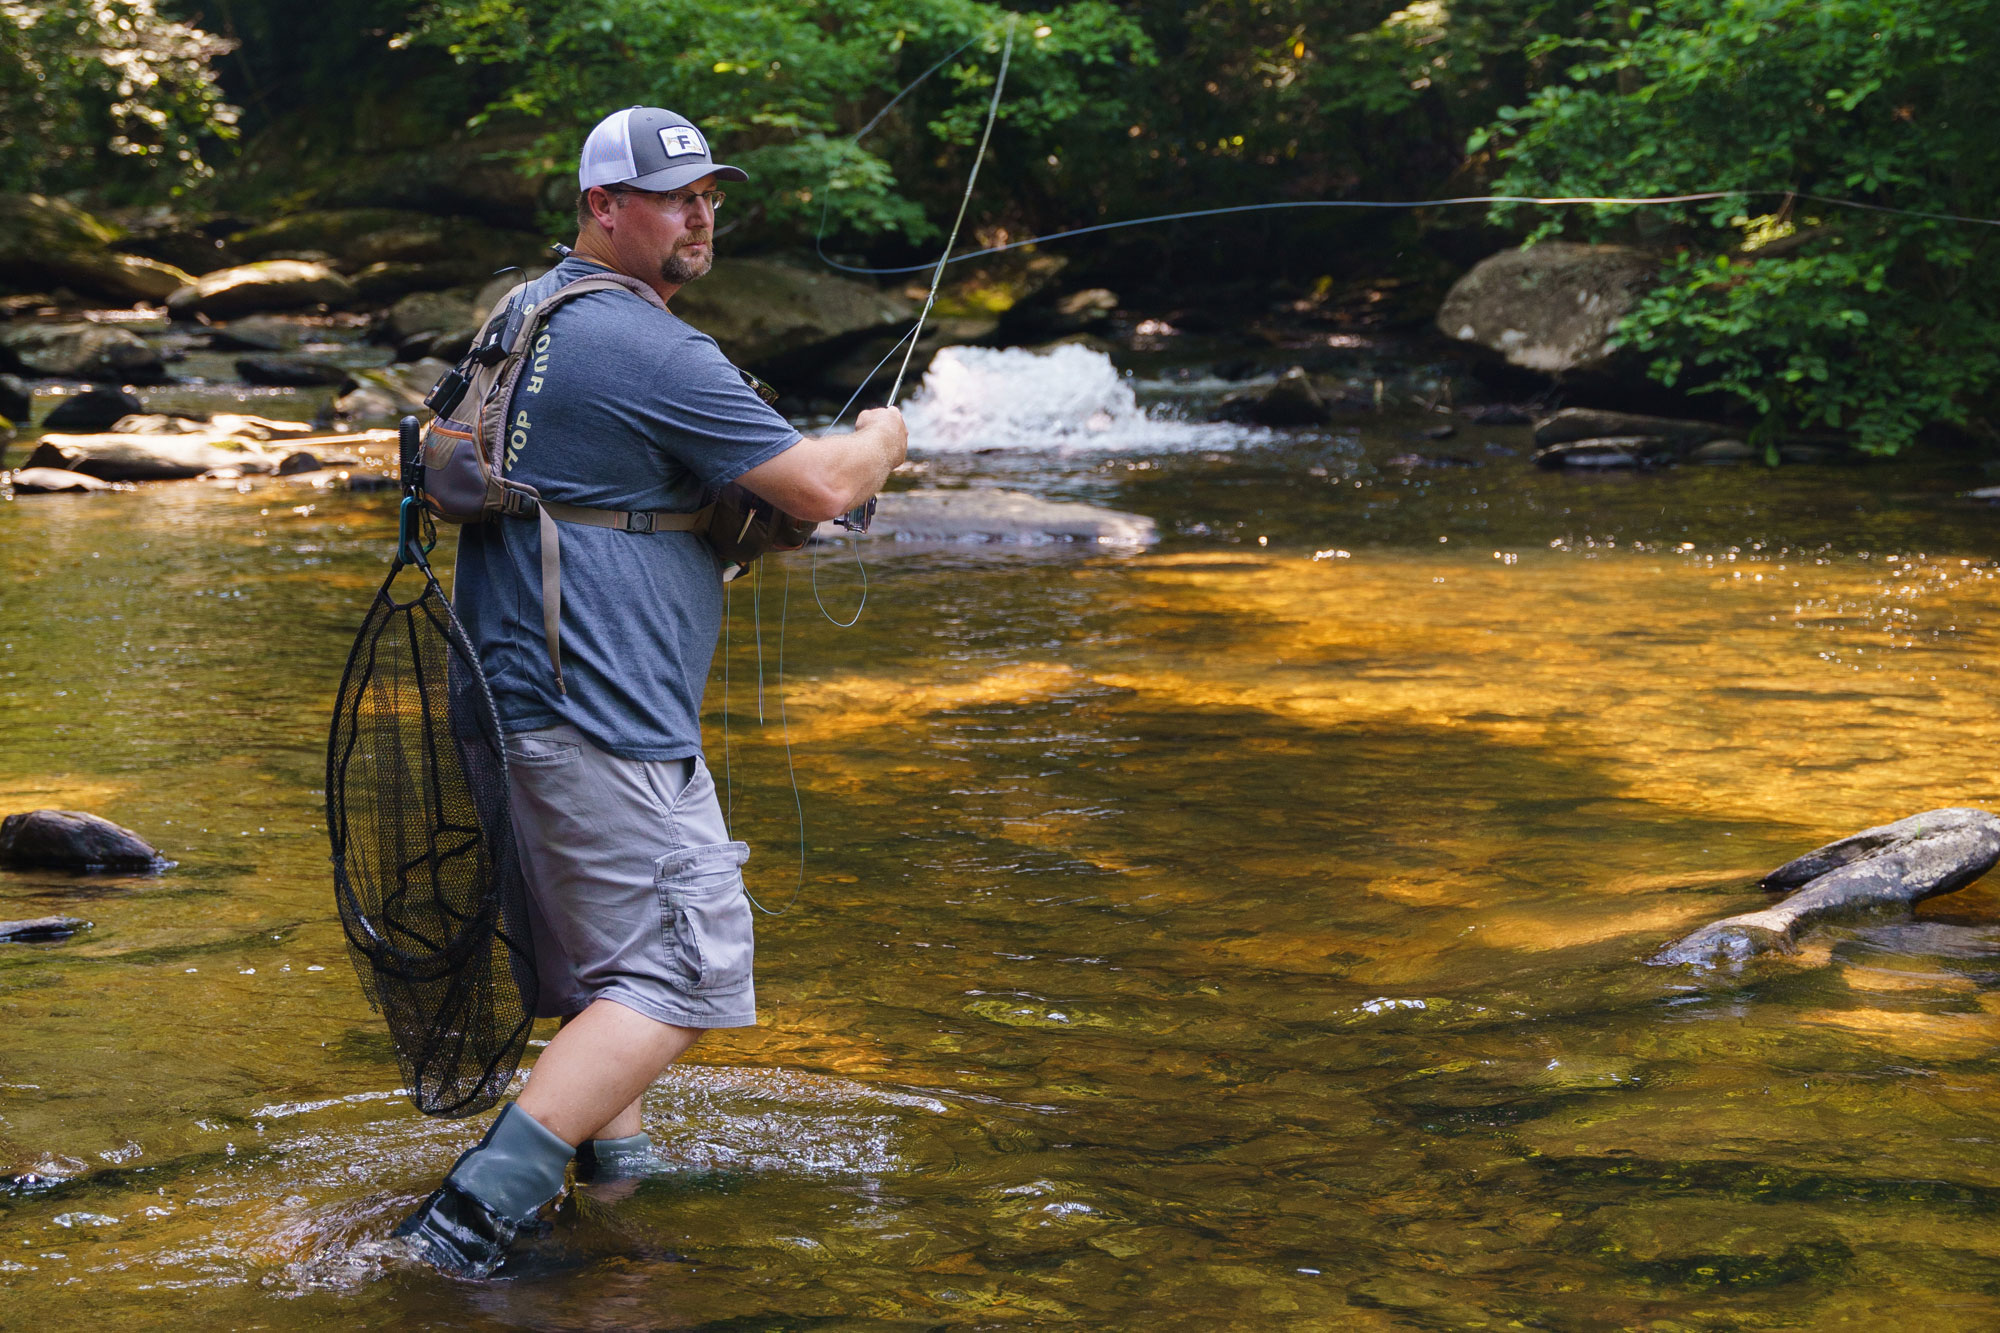 A man with a backpack of fishing gear casts out his line in a river